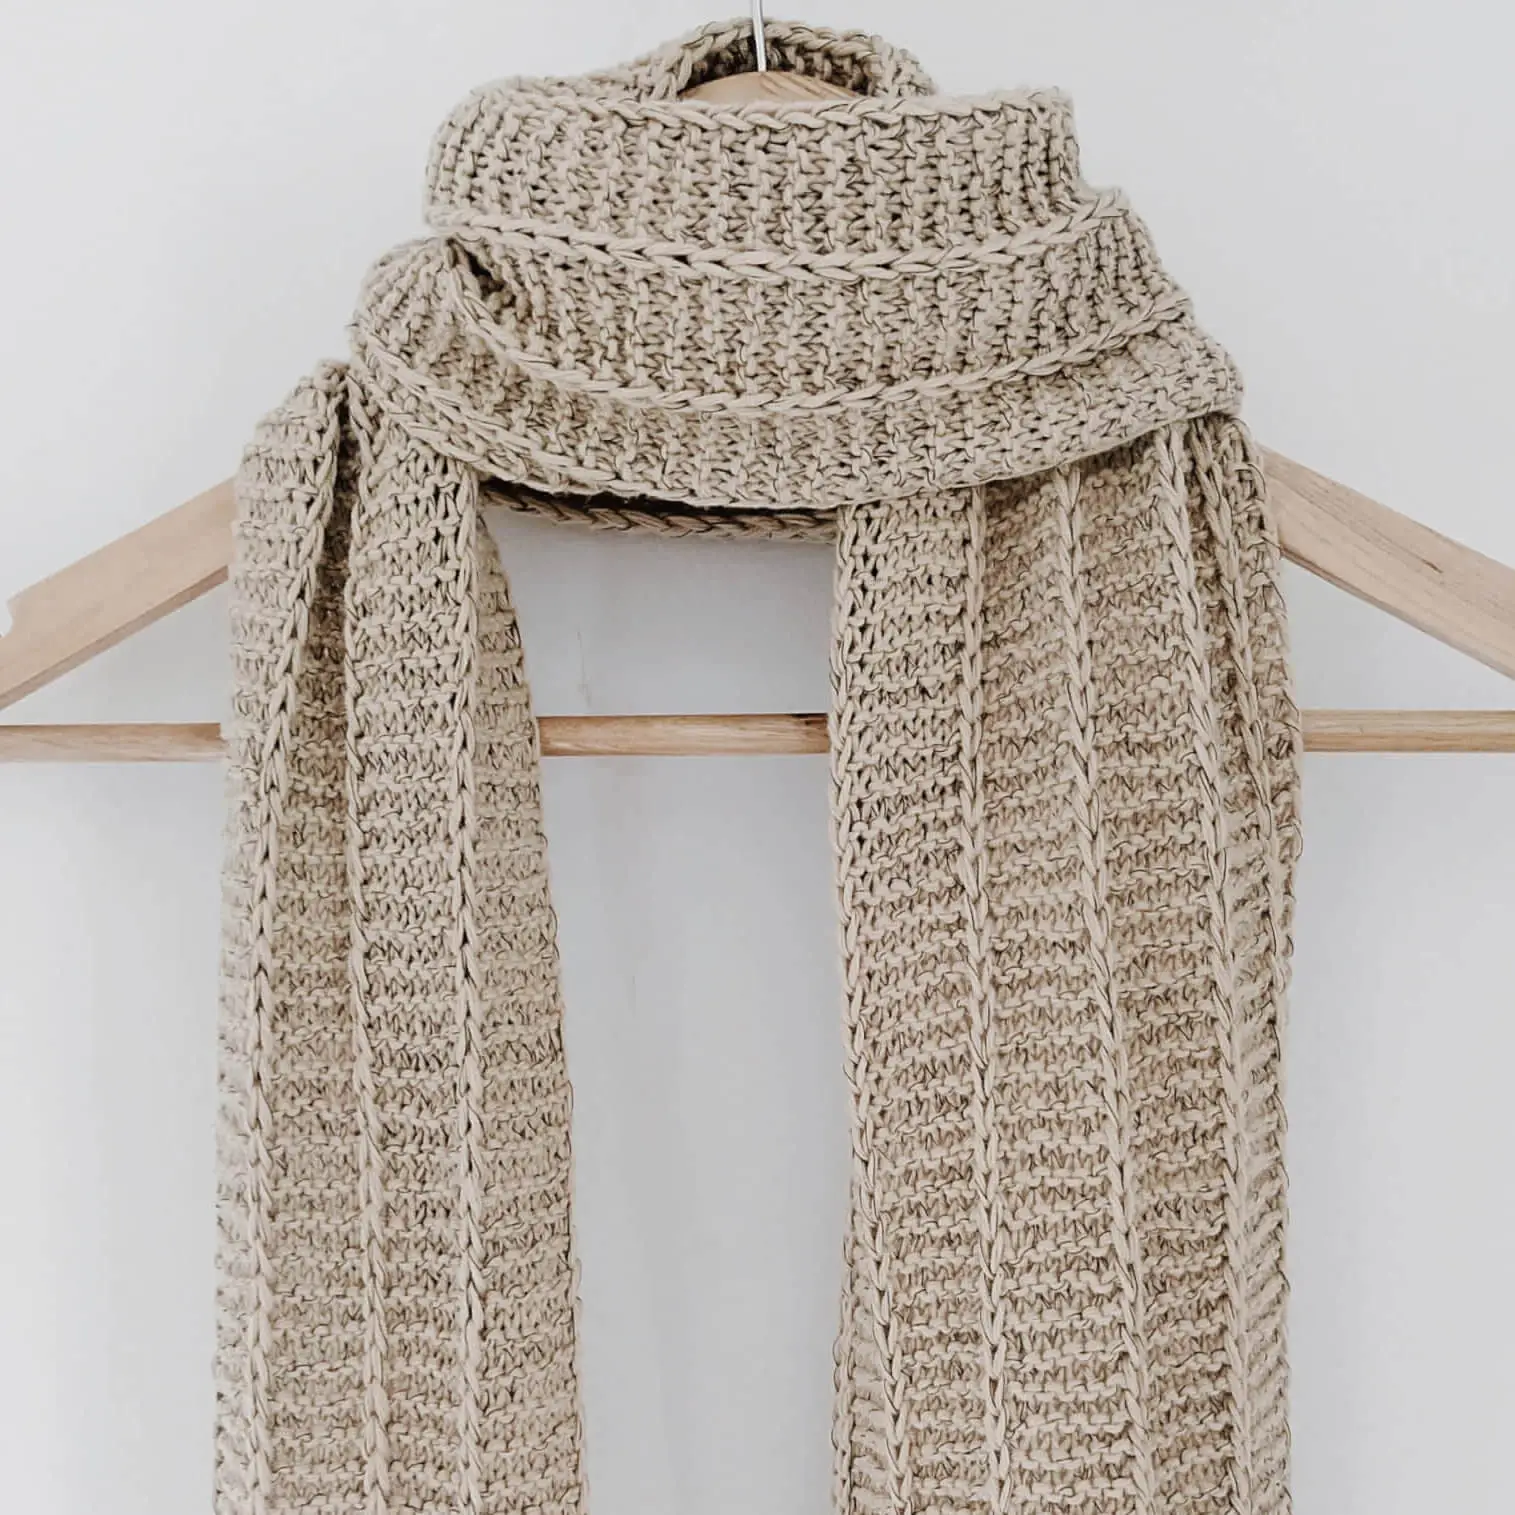 The father-in-law scarf by KnitQ hanging on a wooden hanger in front of a white background